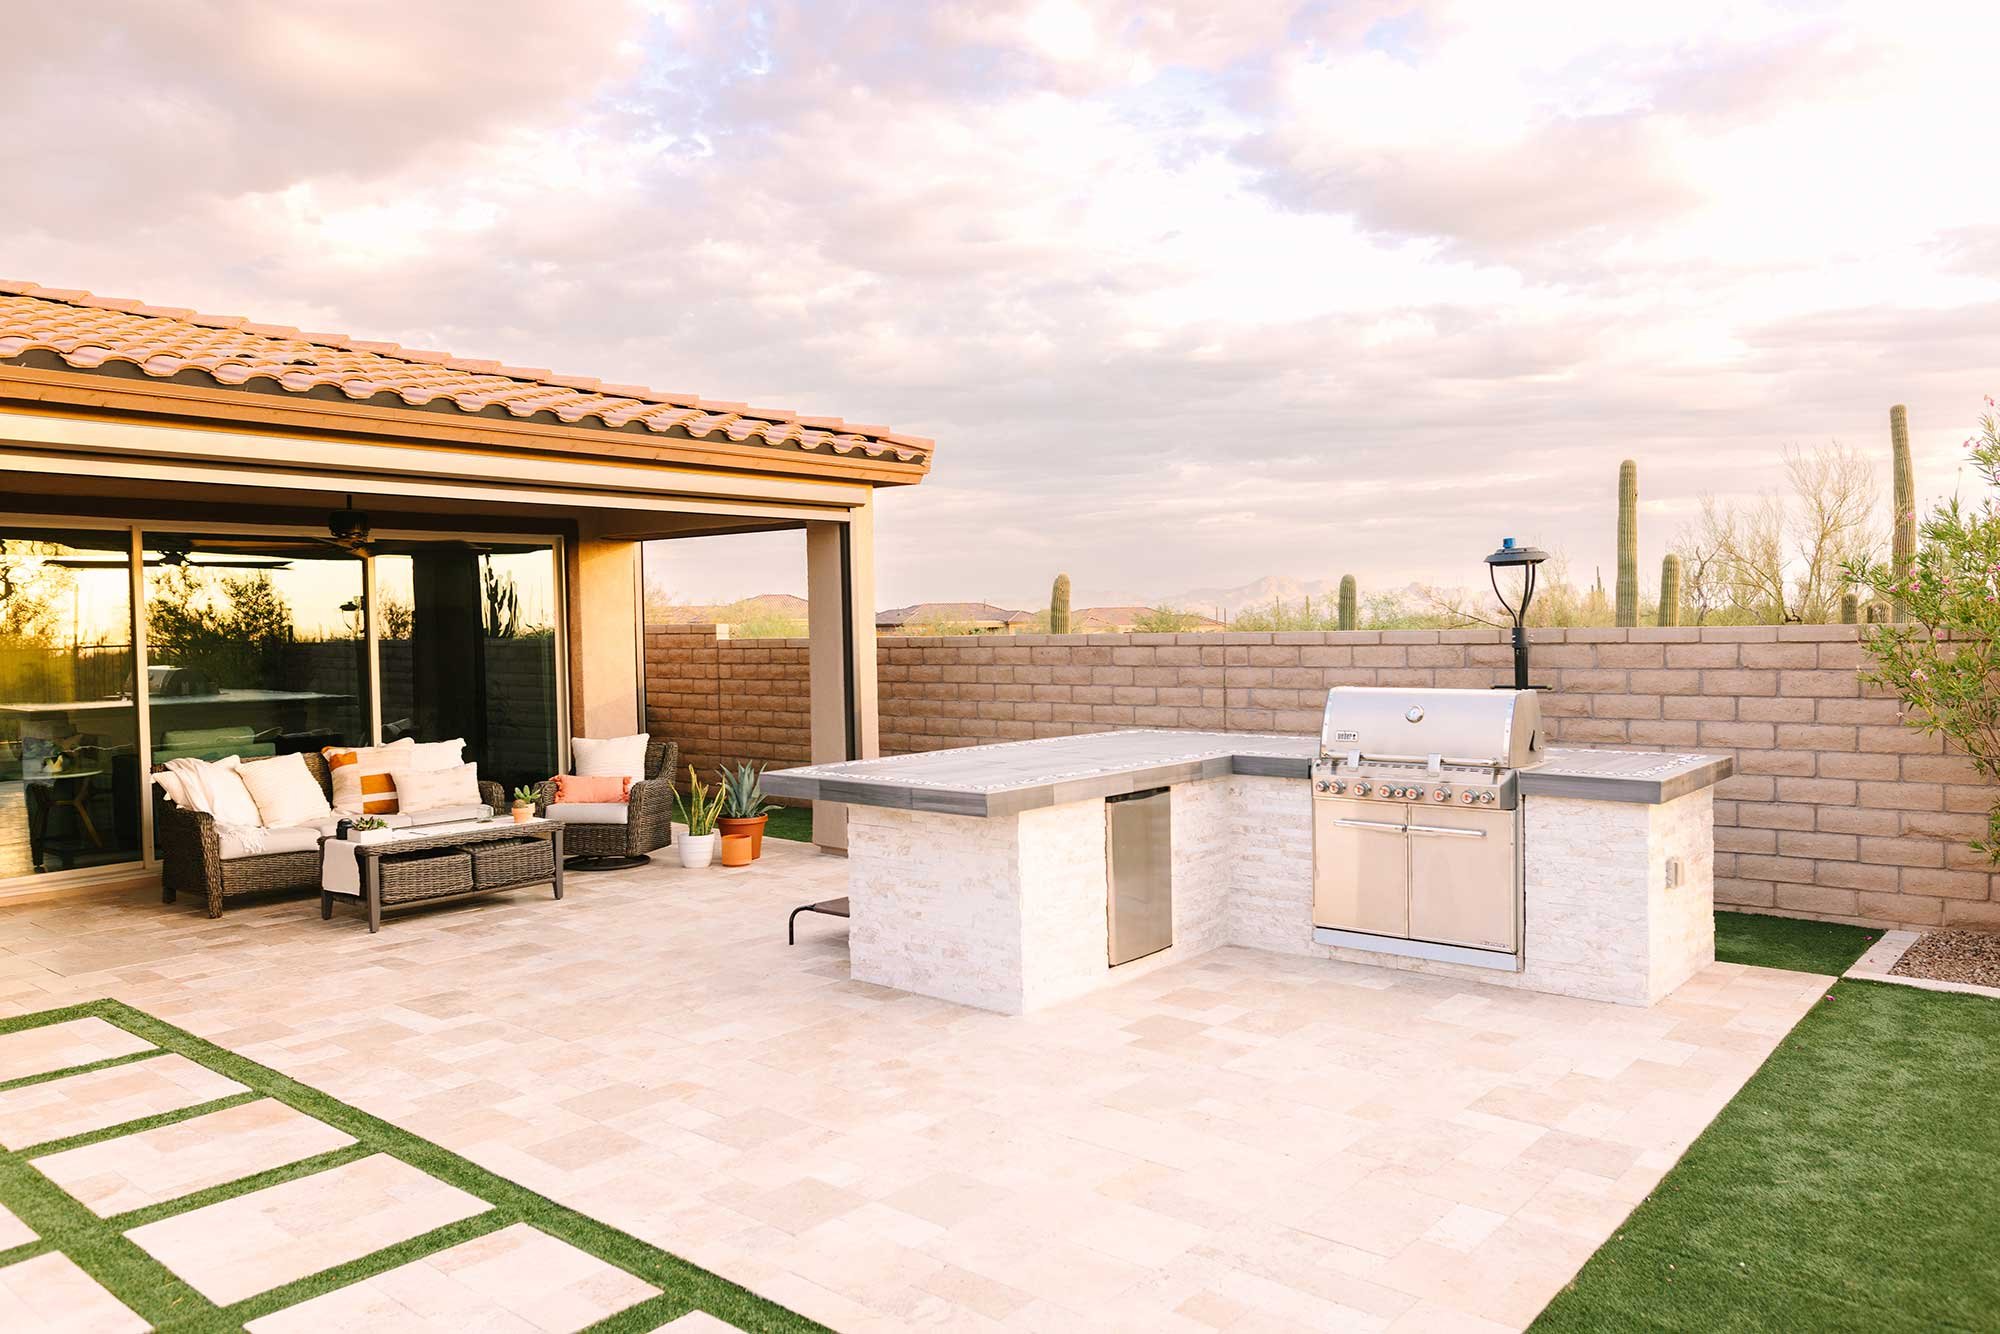 A single pad of travertine paving creates a seamless relationship between the kitchen and covered patio.